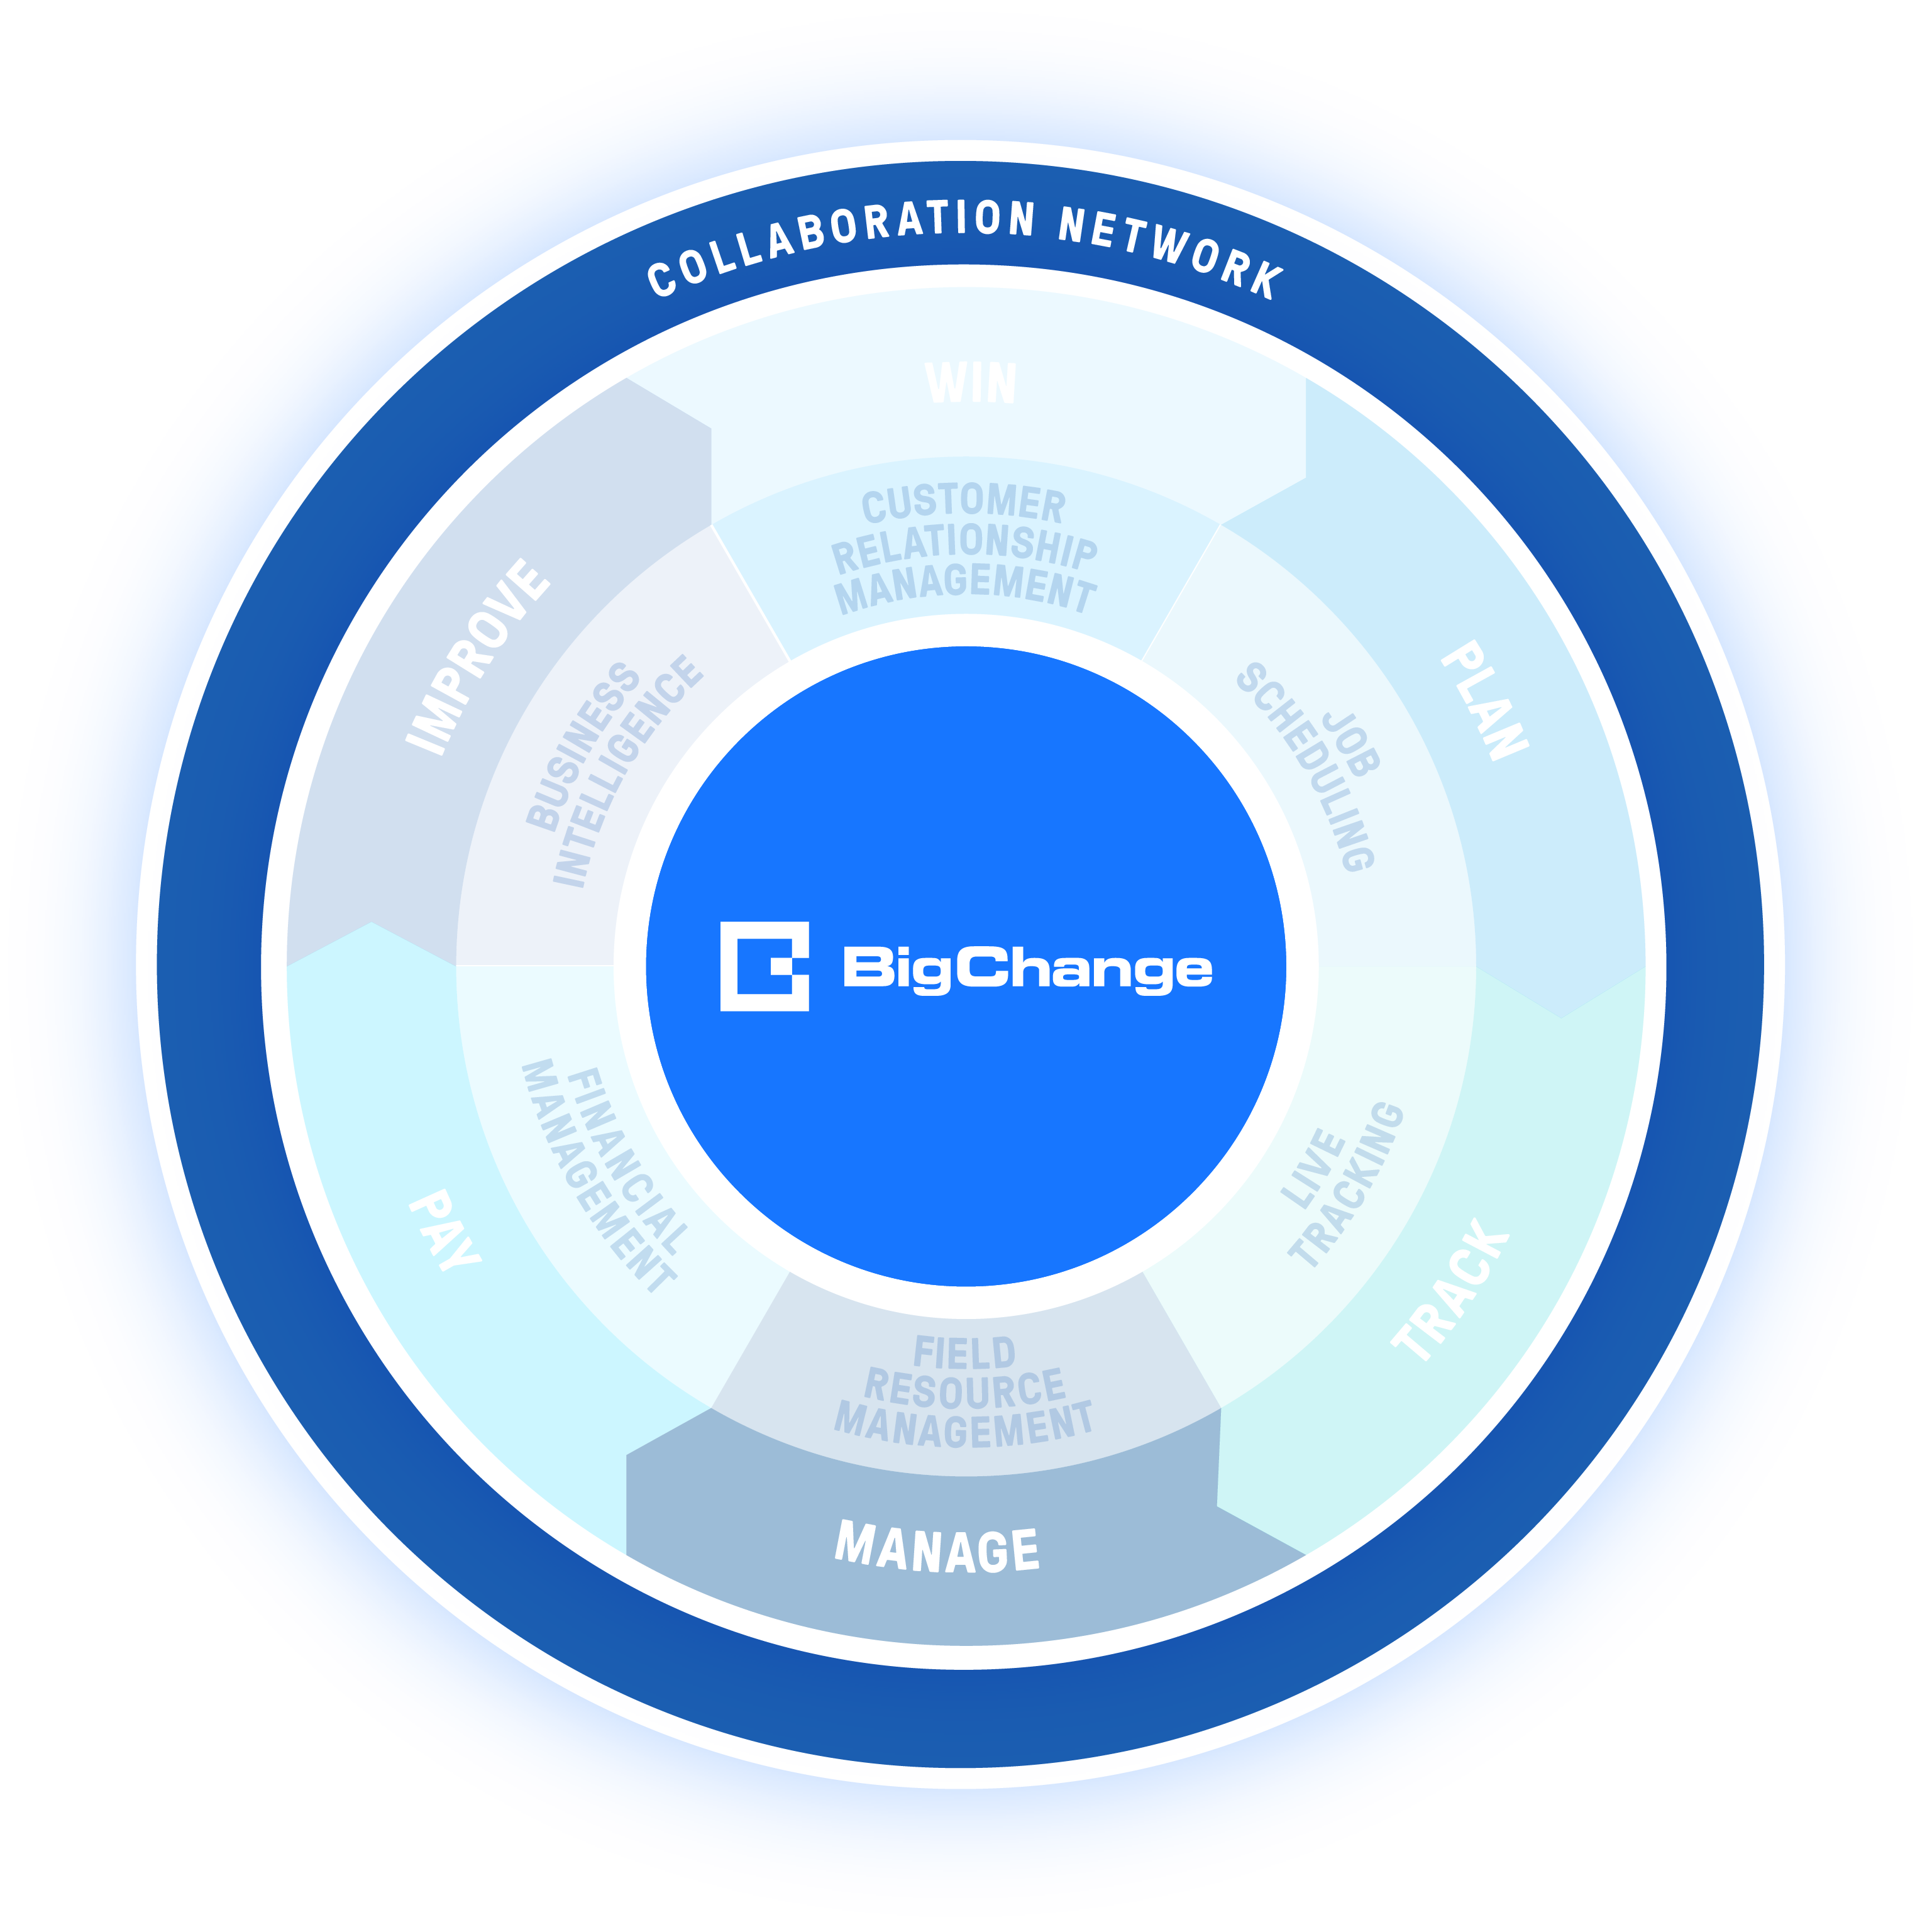 BigChange - About The Product